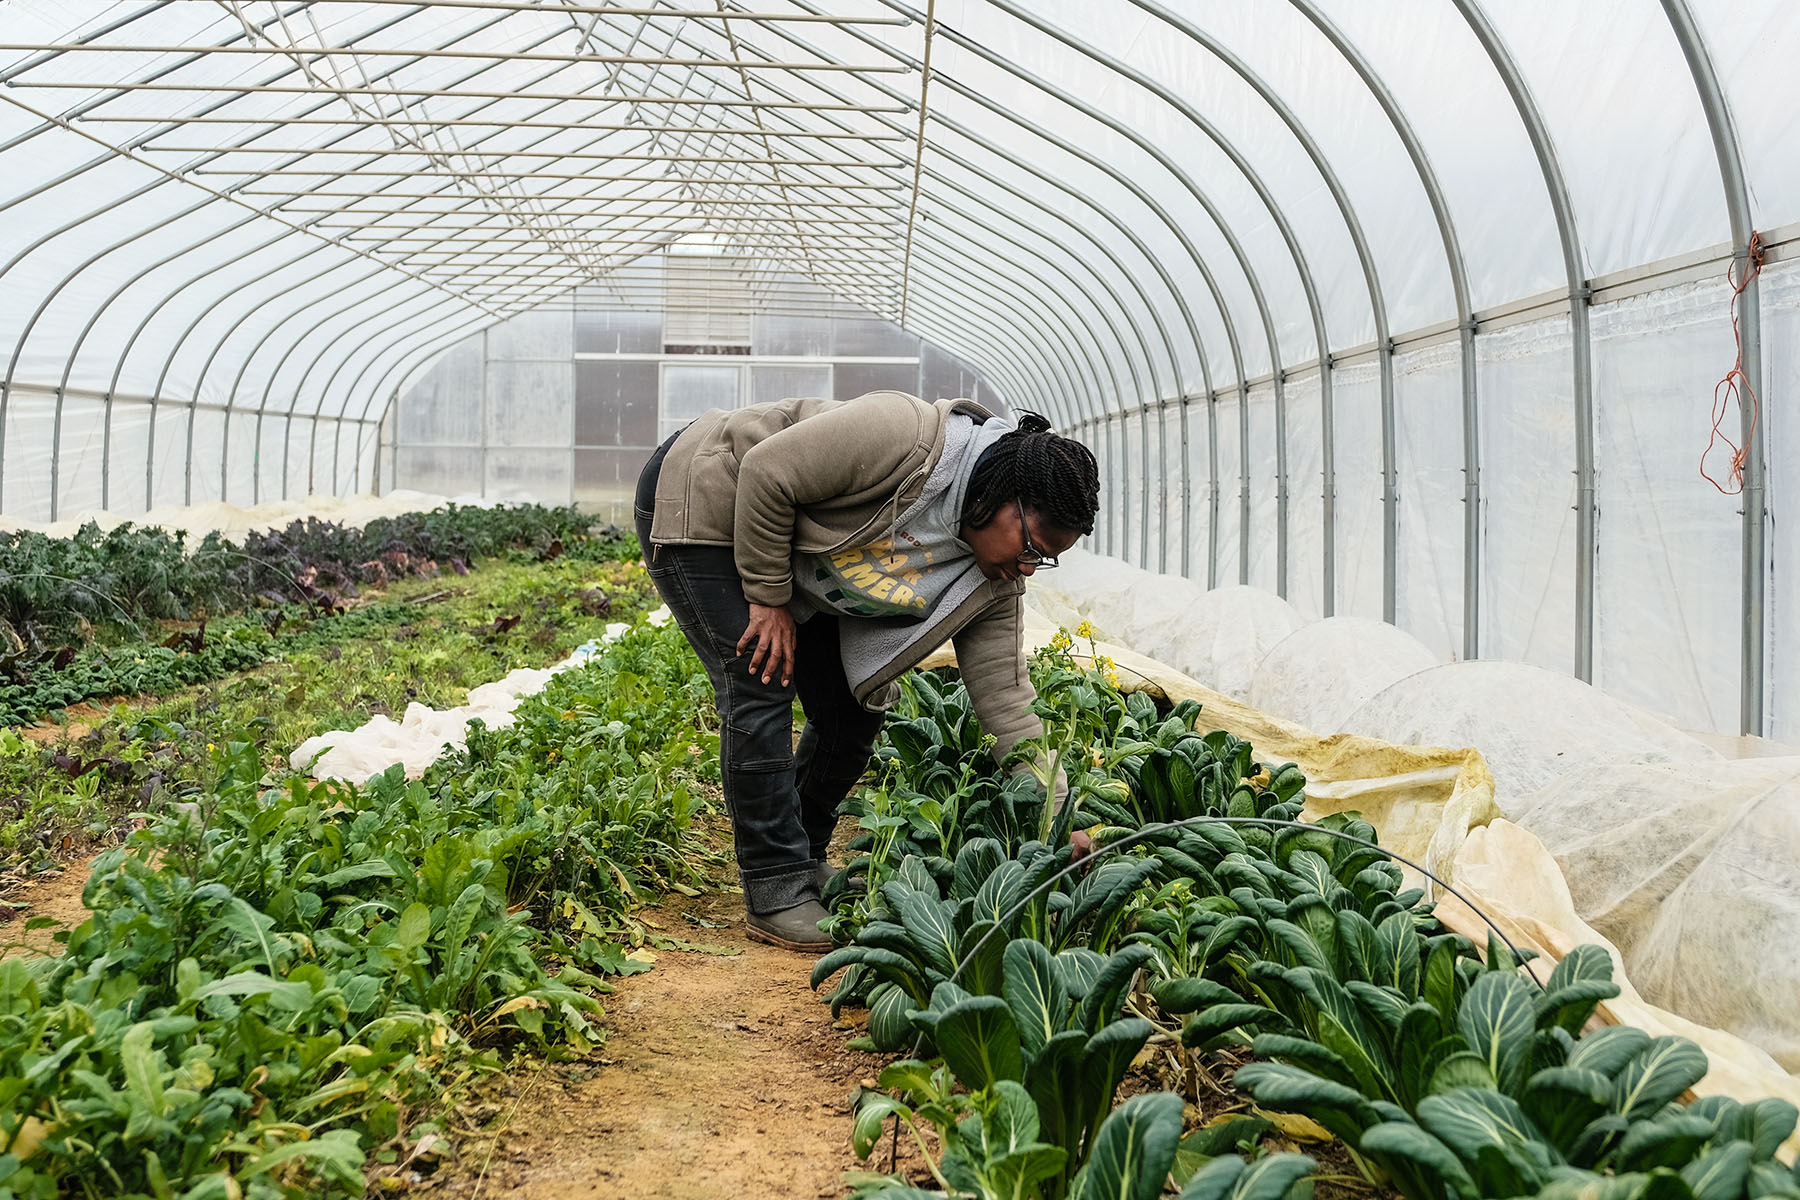 A woman farmer inspects her crops inside a greenhouse.